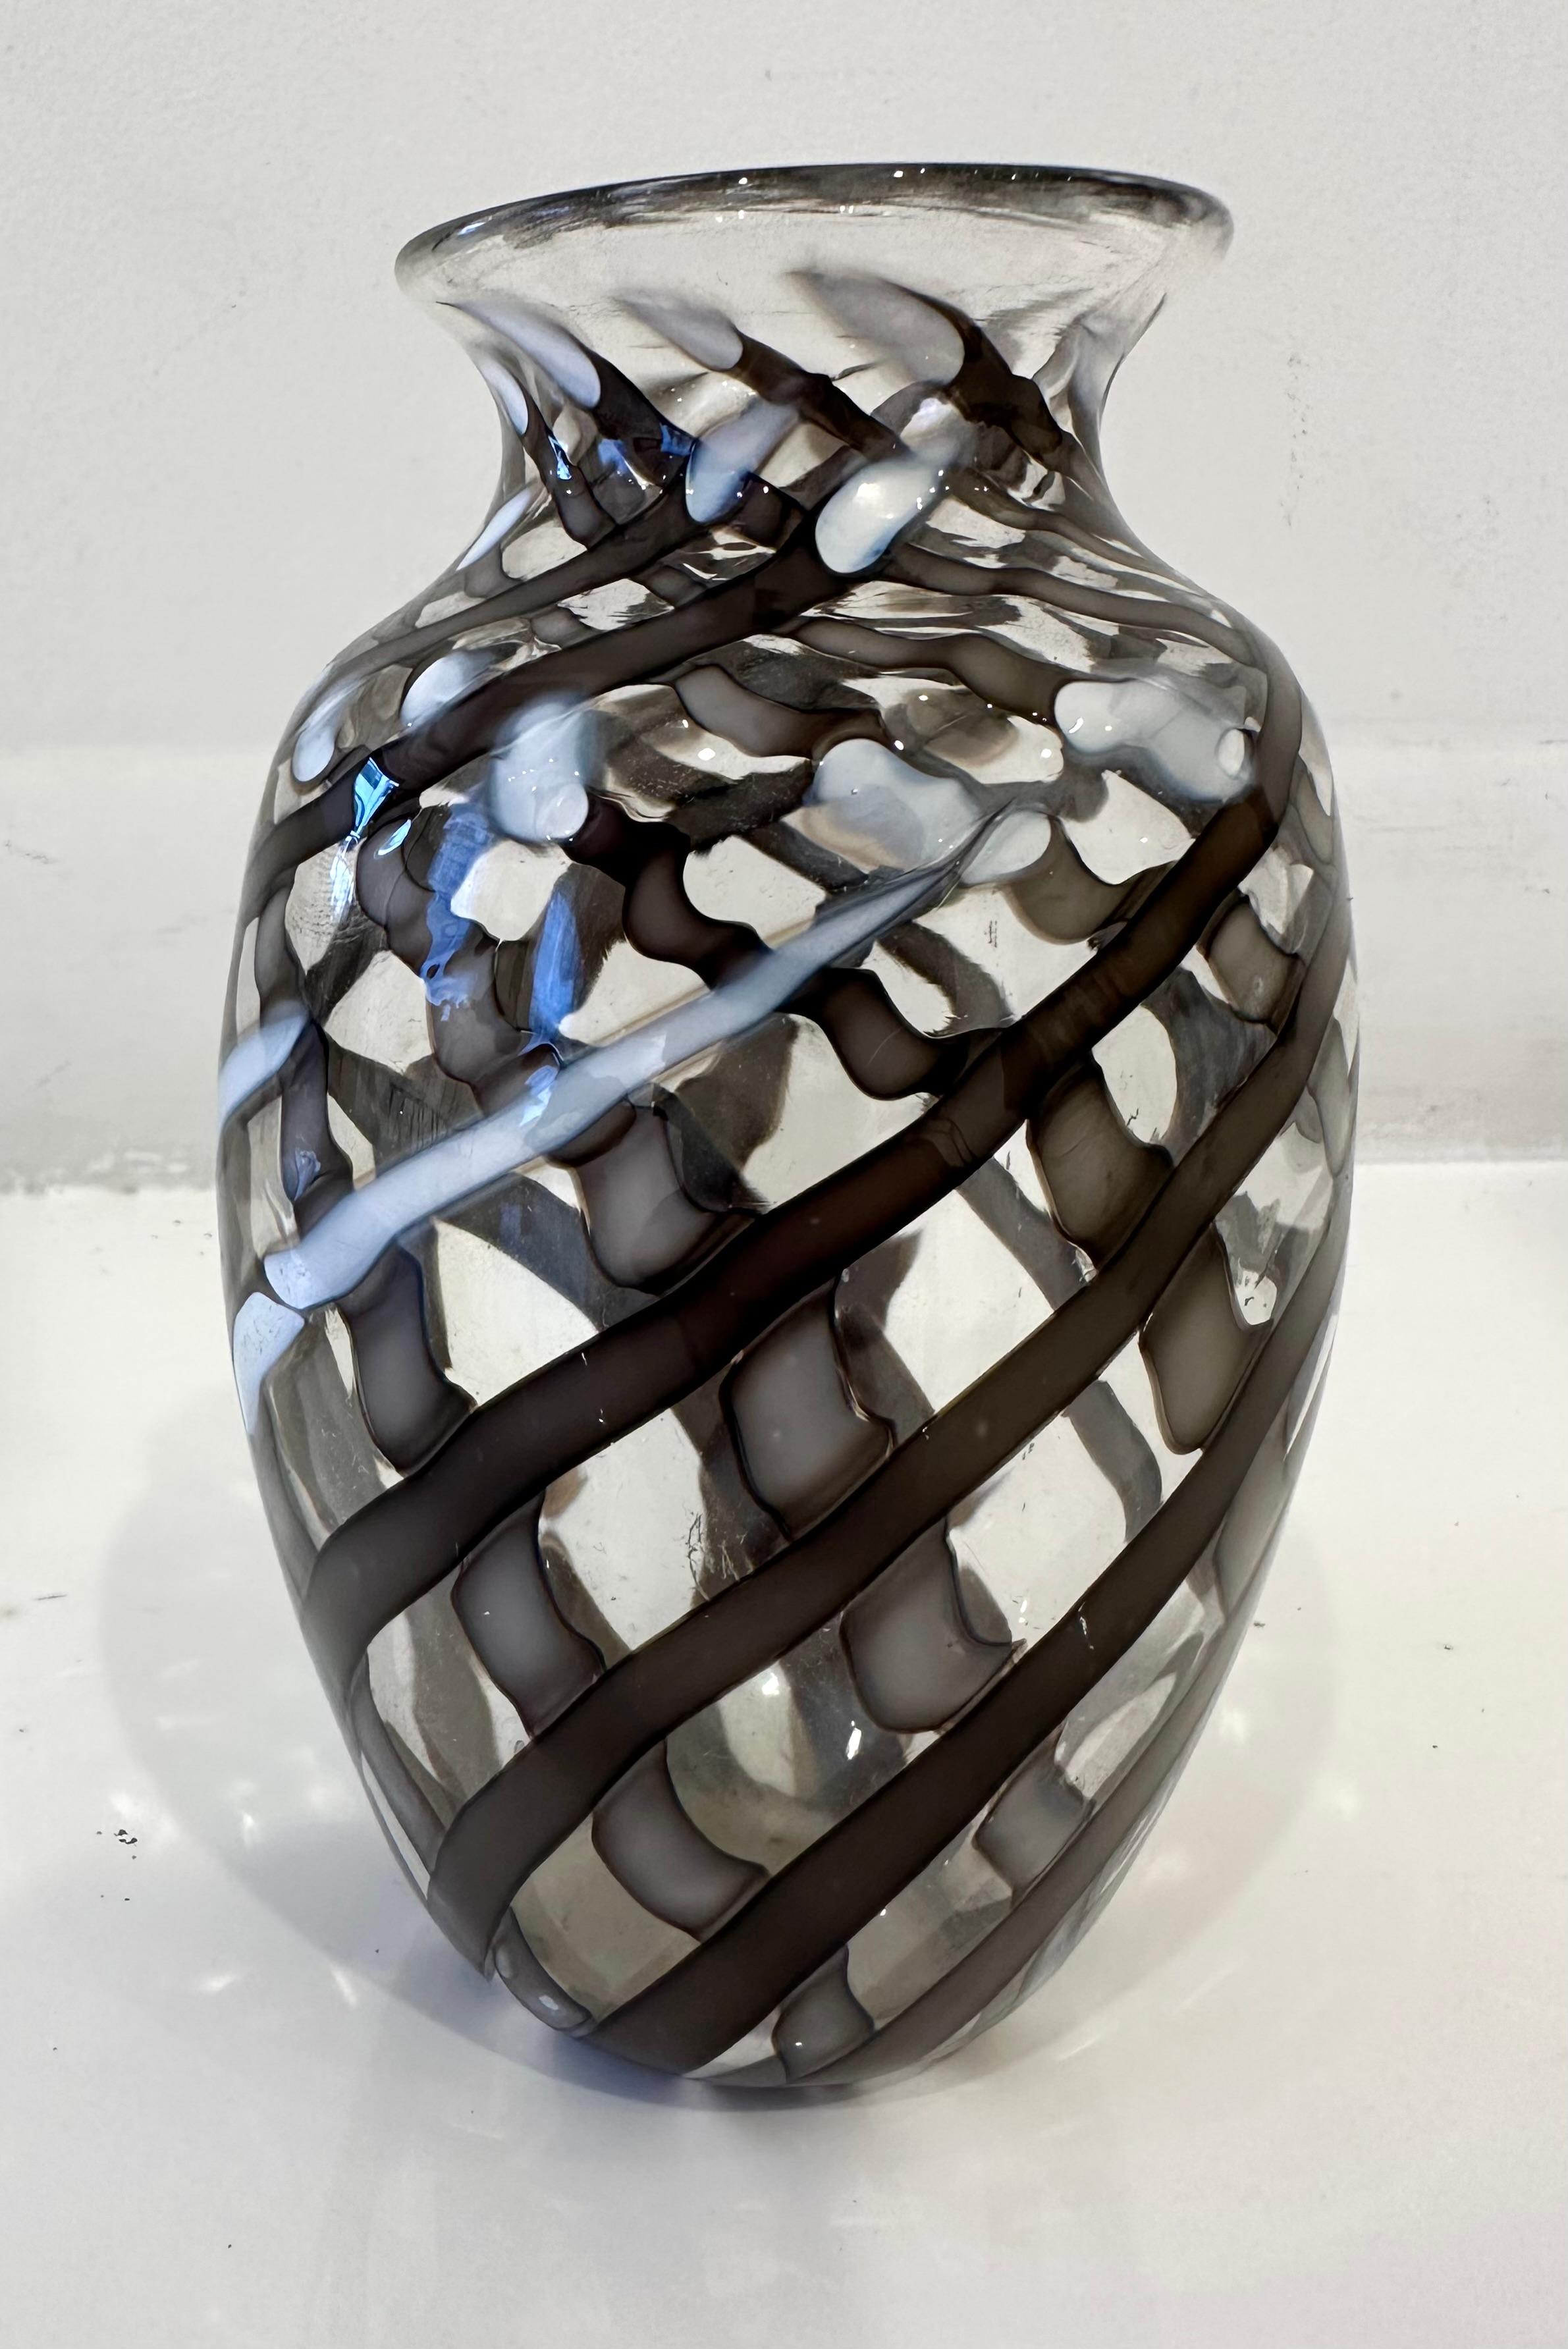 A small vase with opaque black and white striping, by Barovier.